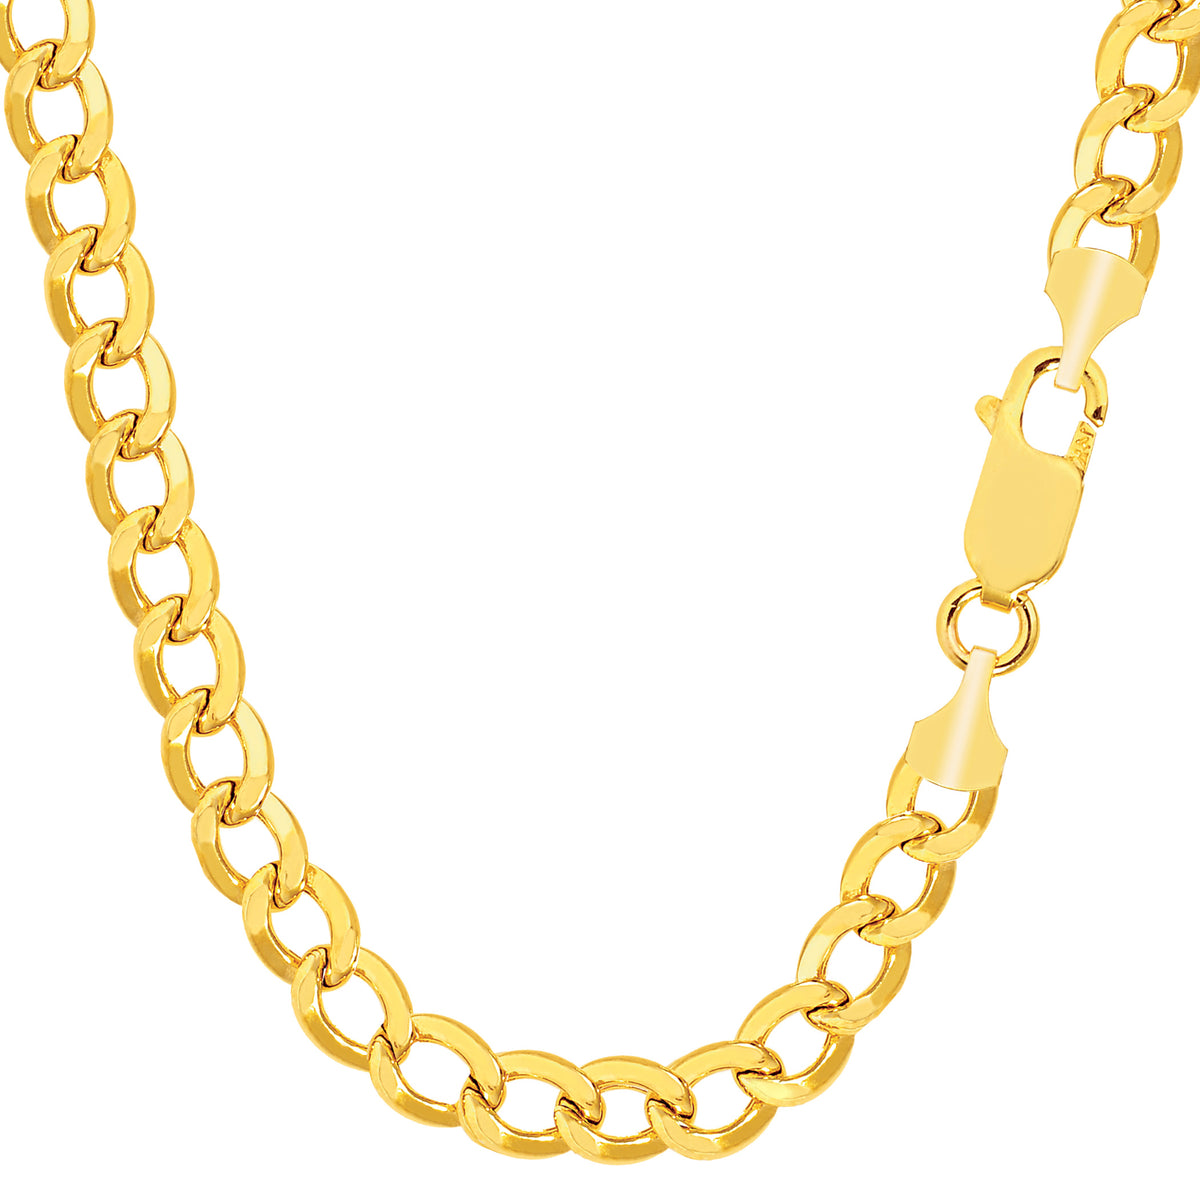 14K Yellow Gold Filled Solid Curb Chain Bracelet, 7.0mm, 8.5" fine designer jewelry for men and women